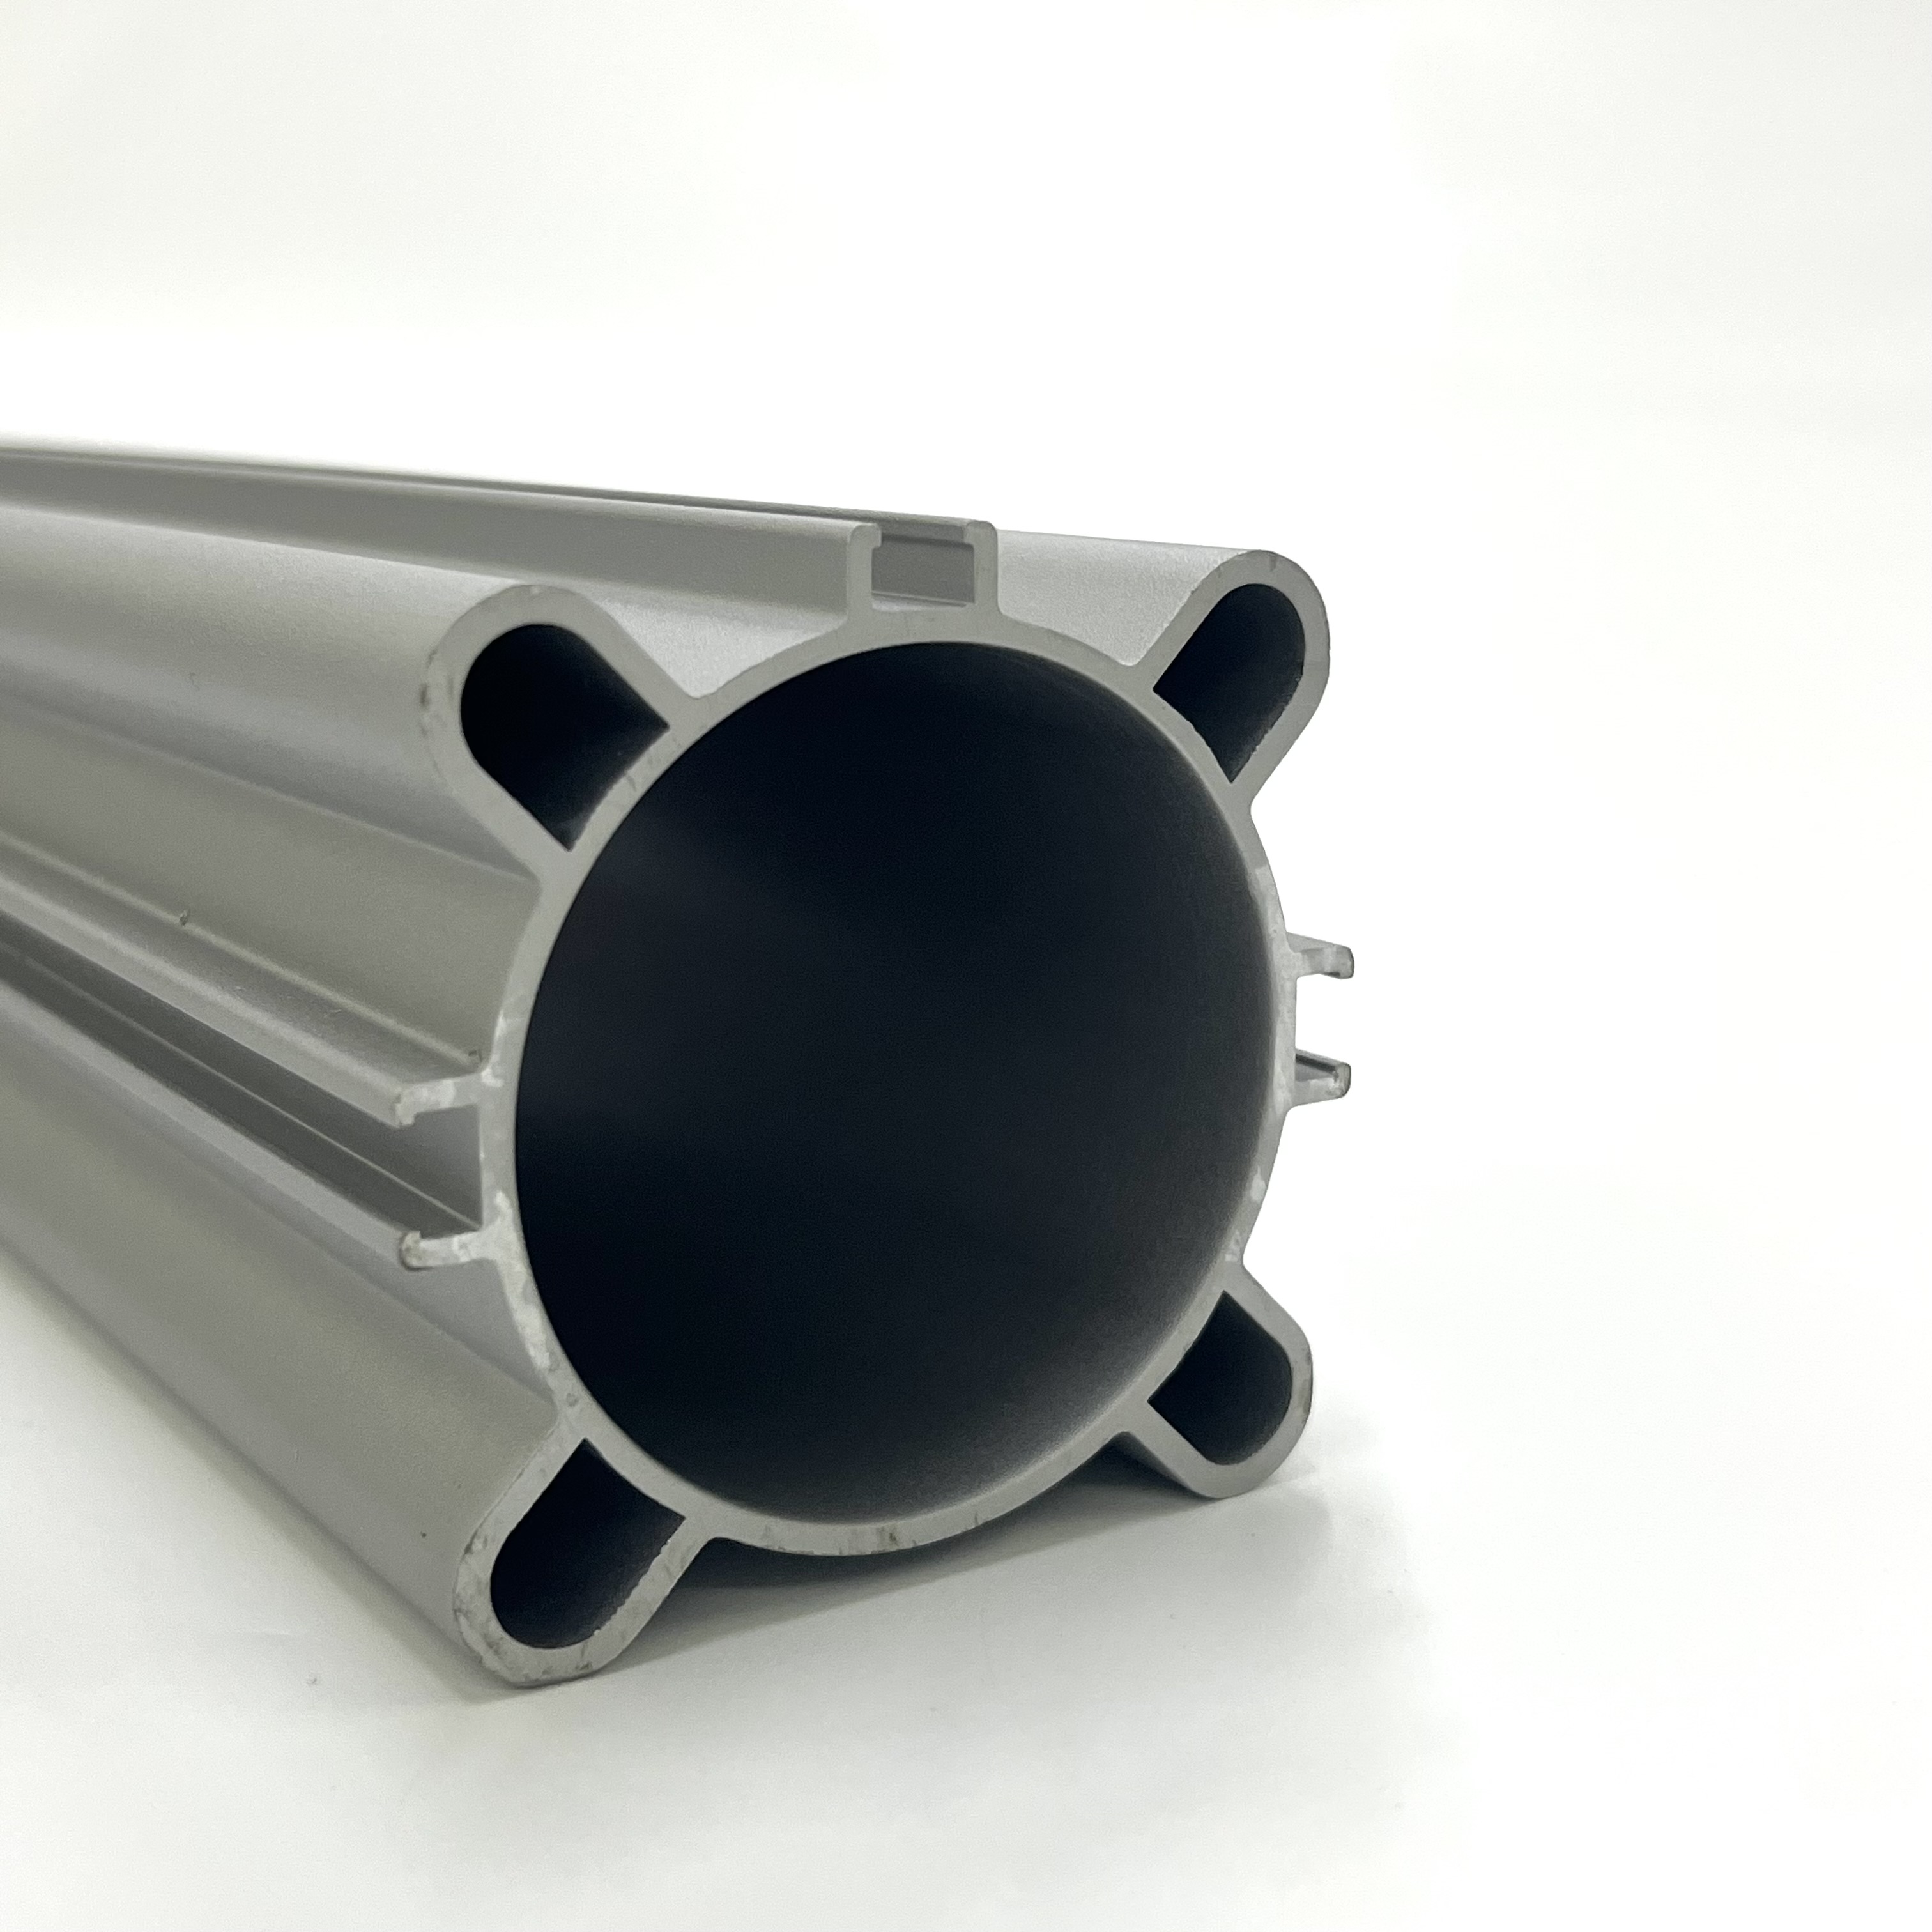 ISO-C ISO6431 ISO15552 MICKEY MOUSE LE 3 SENSOR CHANNEL ALUMINIUM PNEUMATIC CYLINDER TUBE